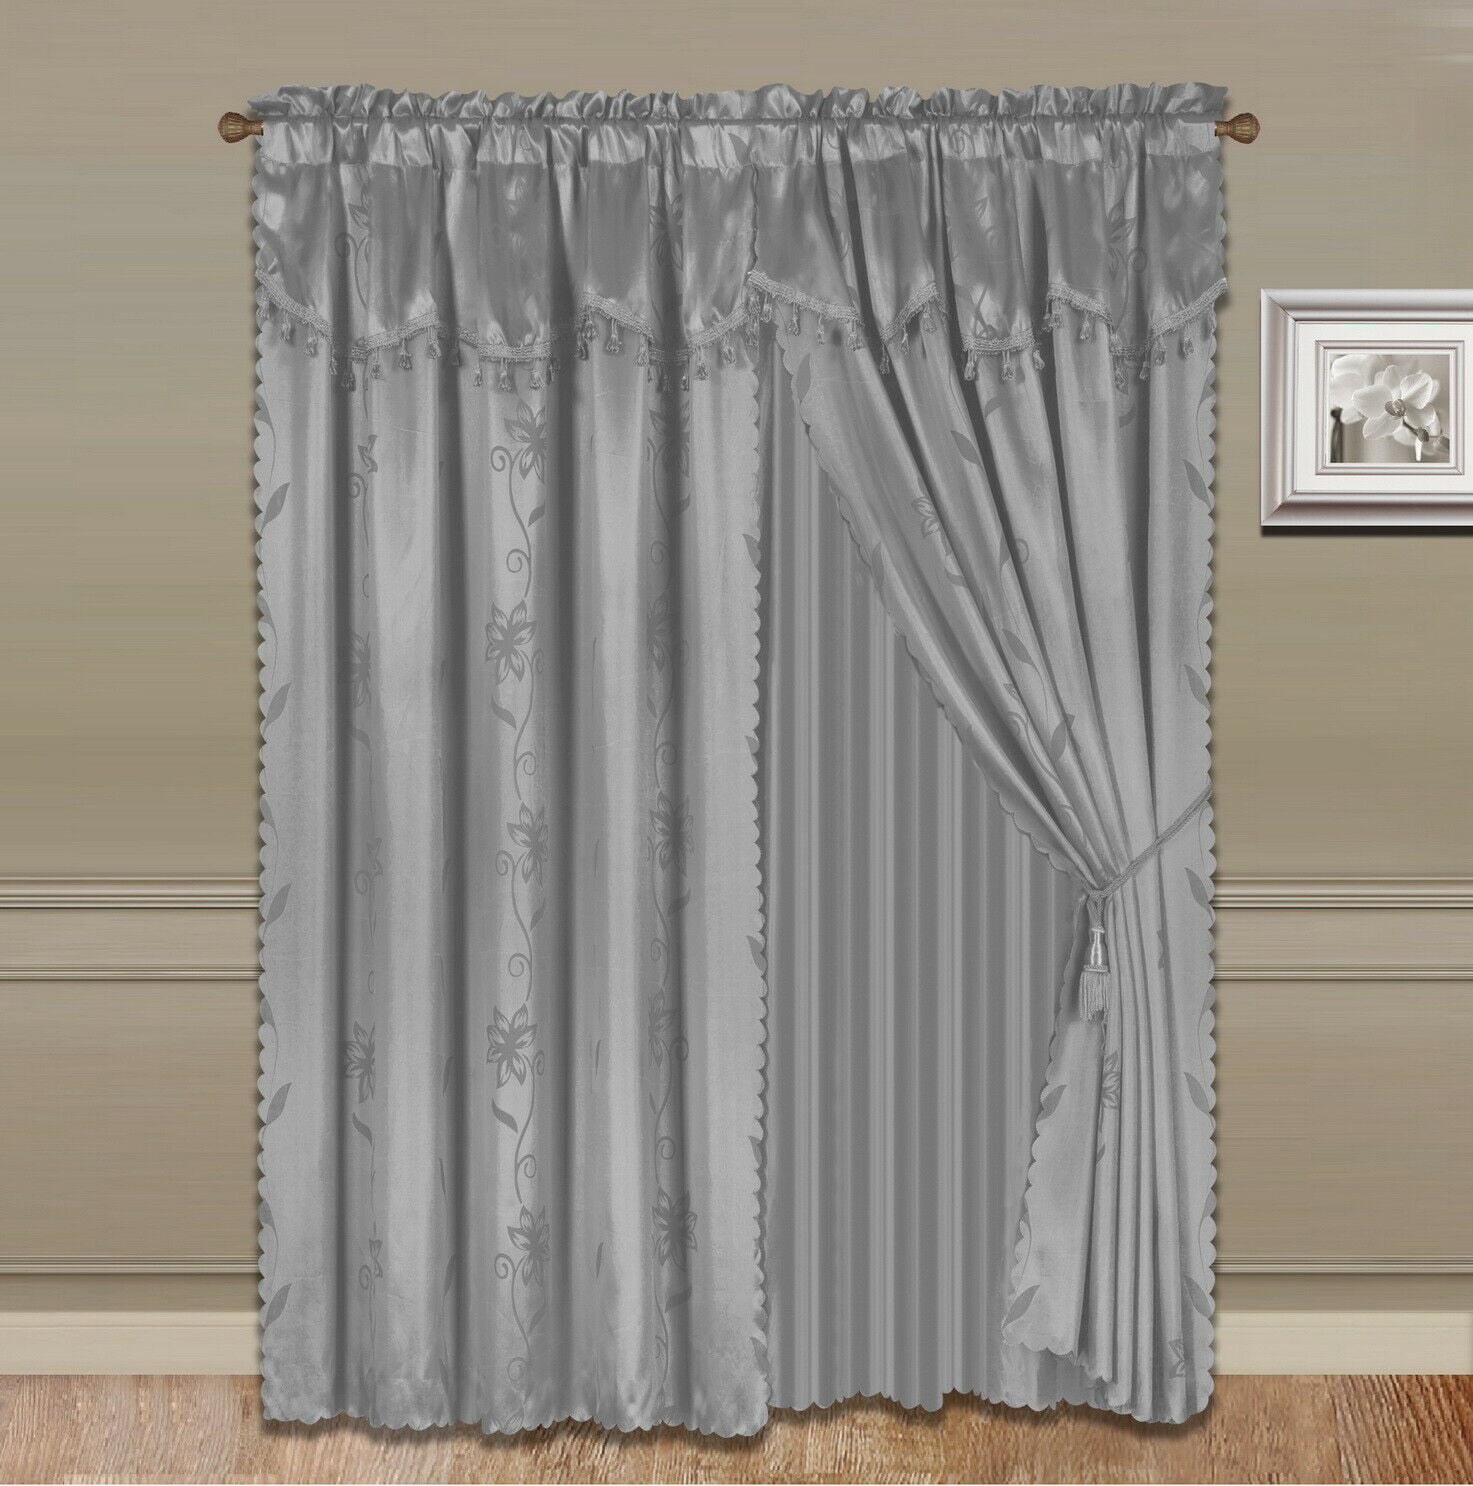 Red Gray Ivory Faux Silk 6 pc Window Set Curtains Panels Drapes Valance 63 84 in 